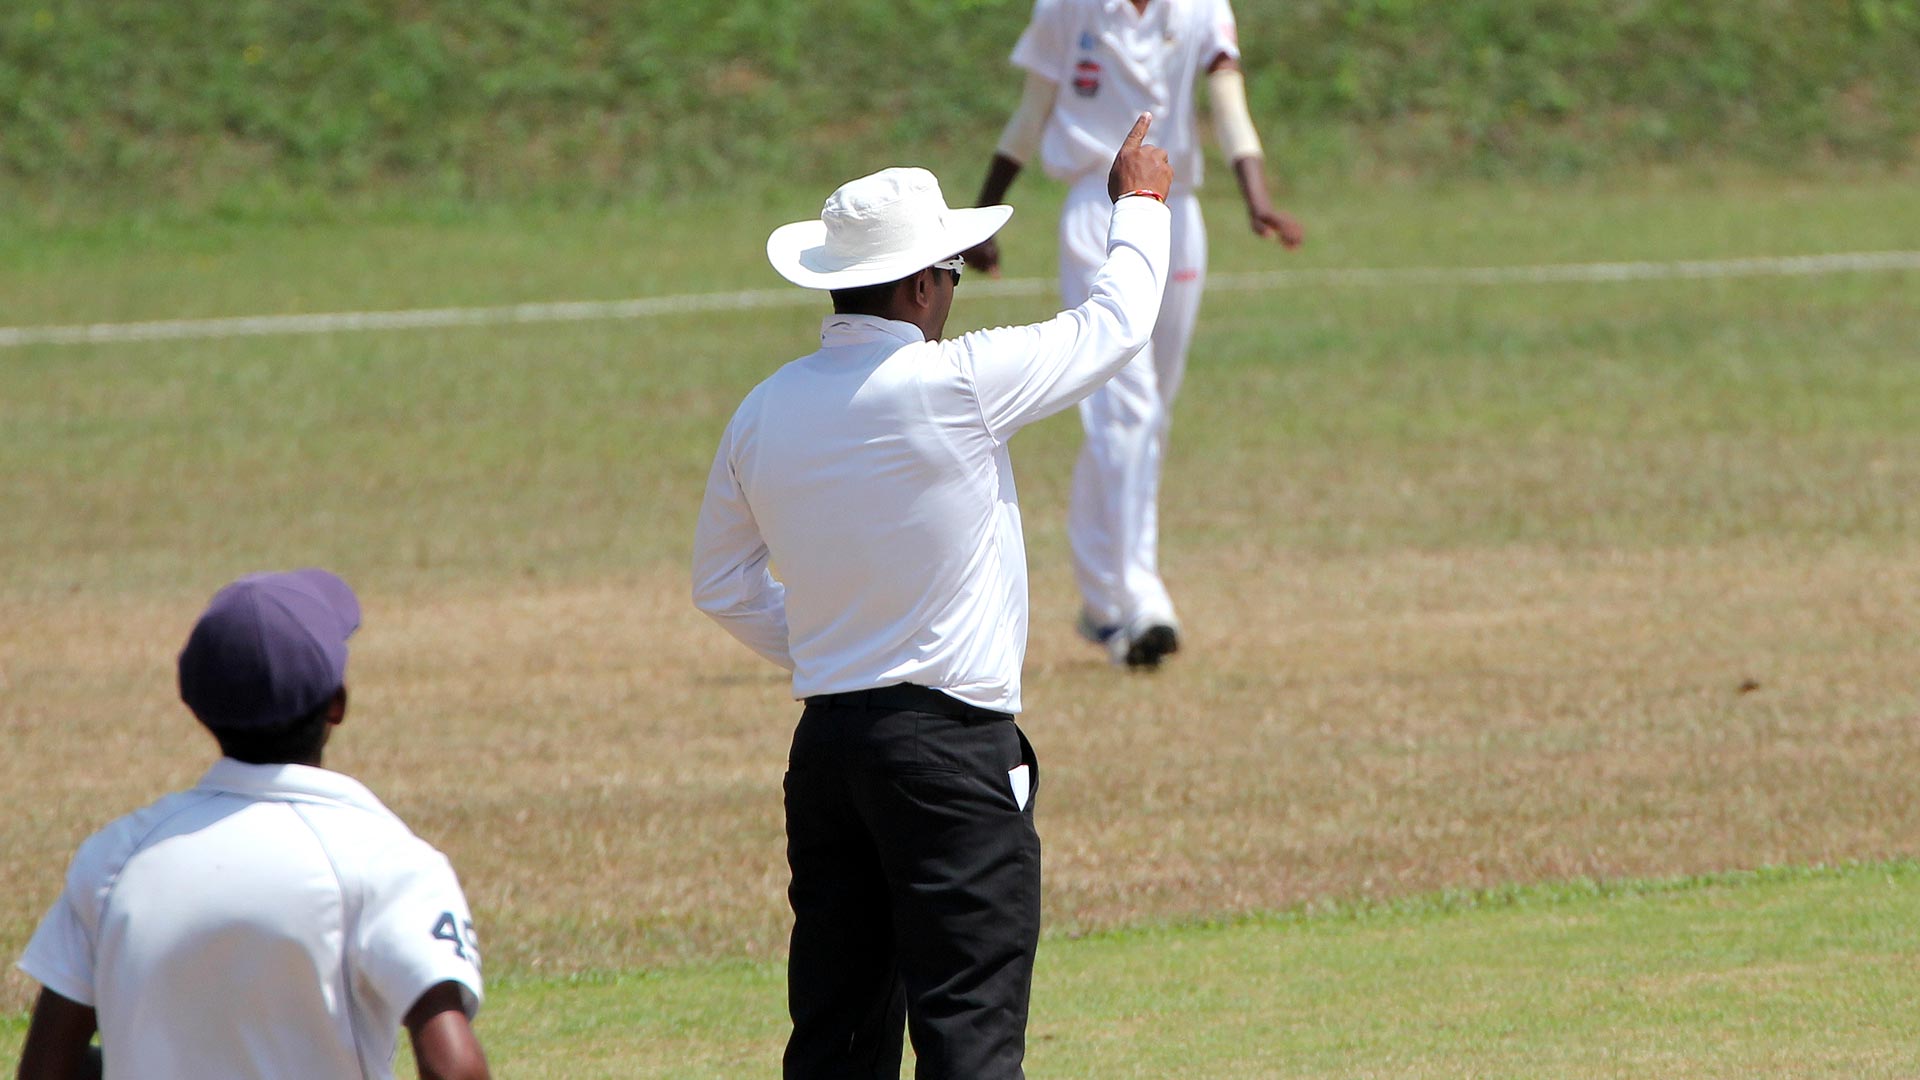 Umpire Giving Player Out